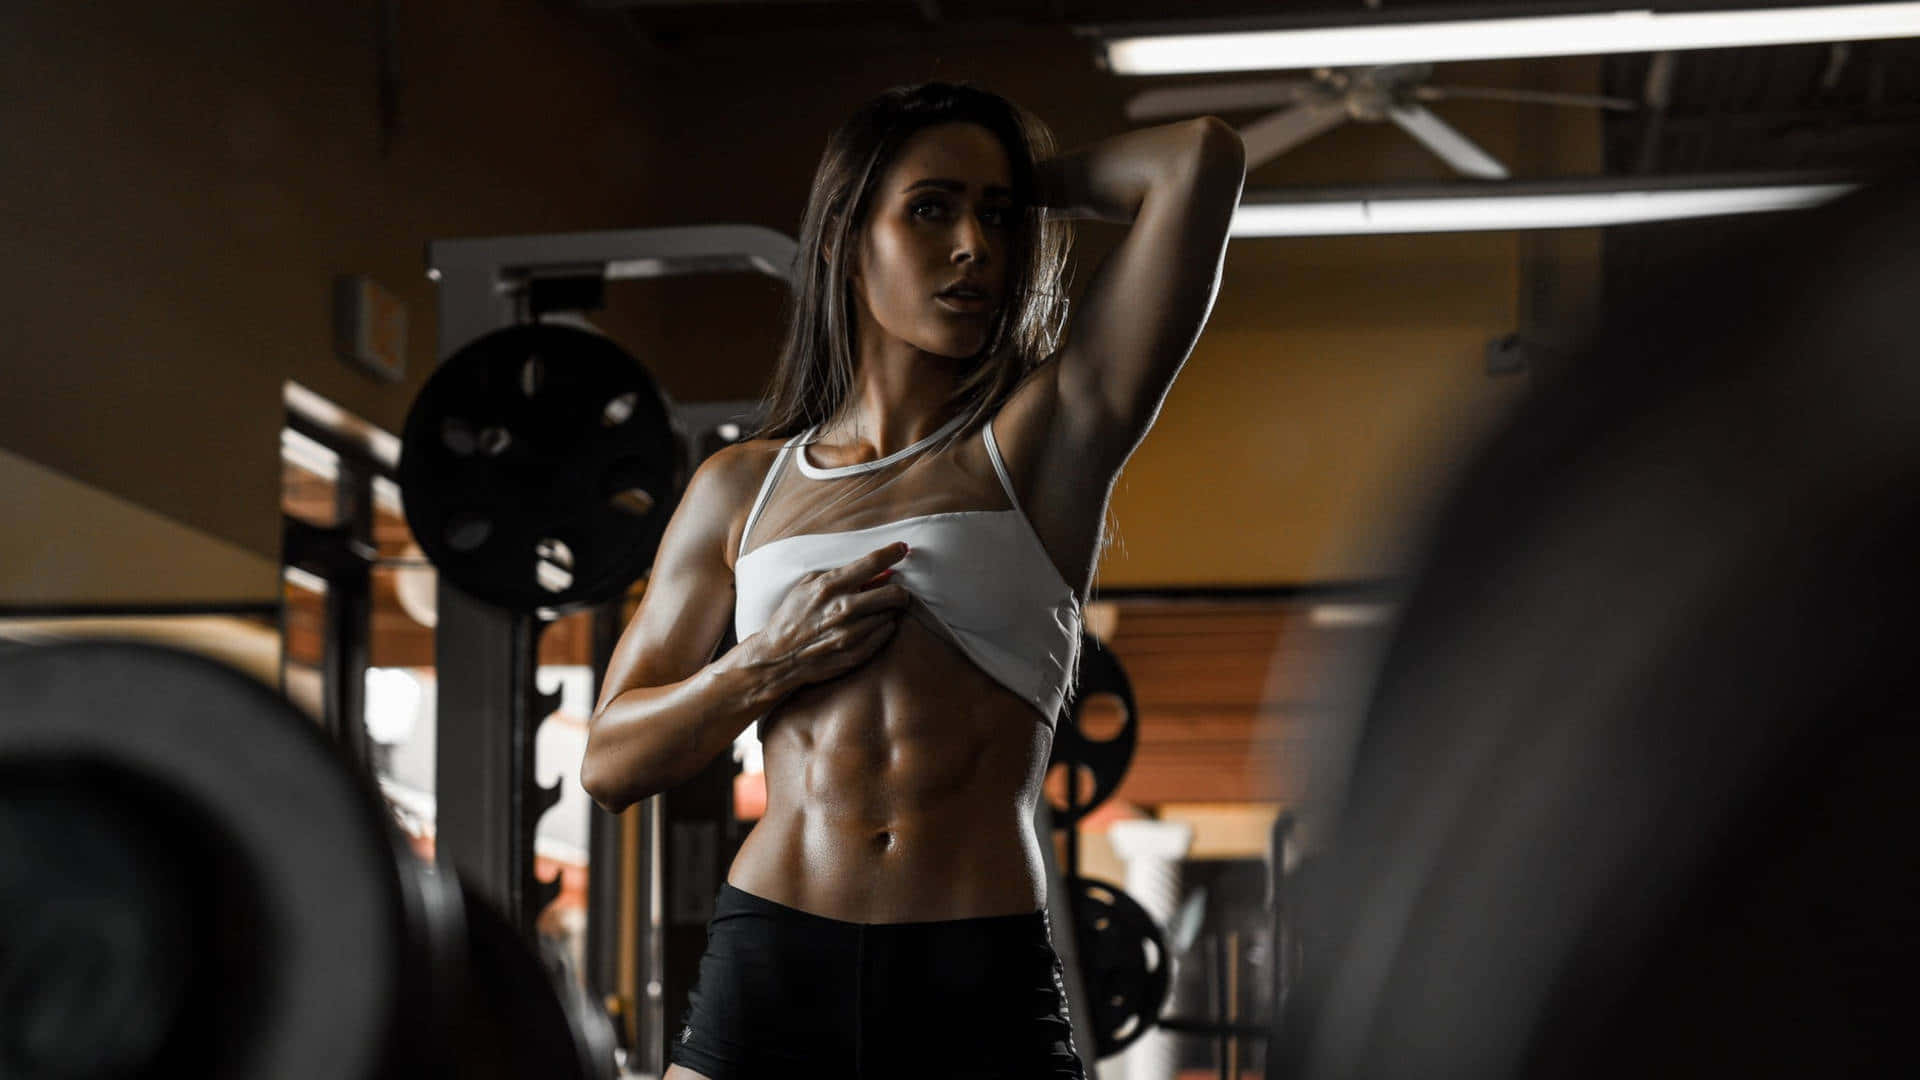 Sexy Woman Training At Gym Wallpaper